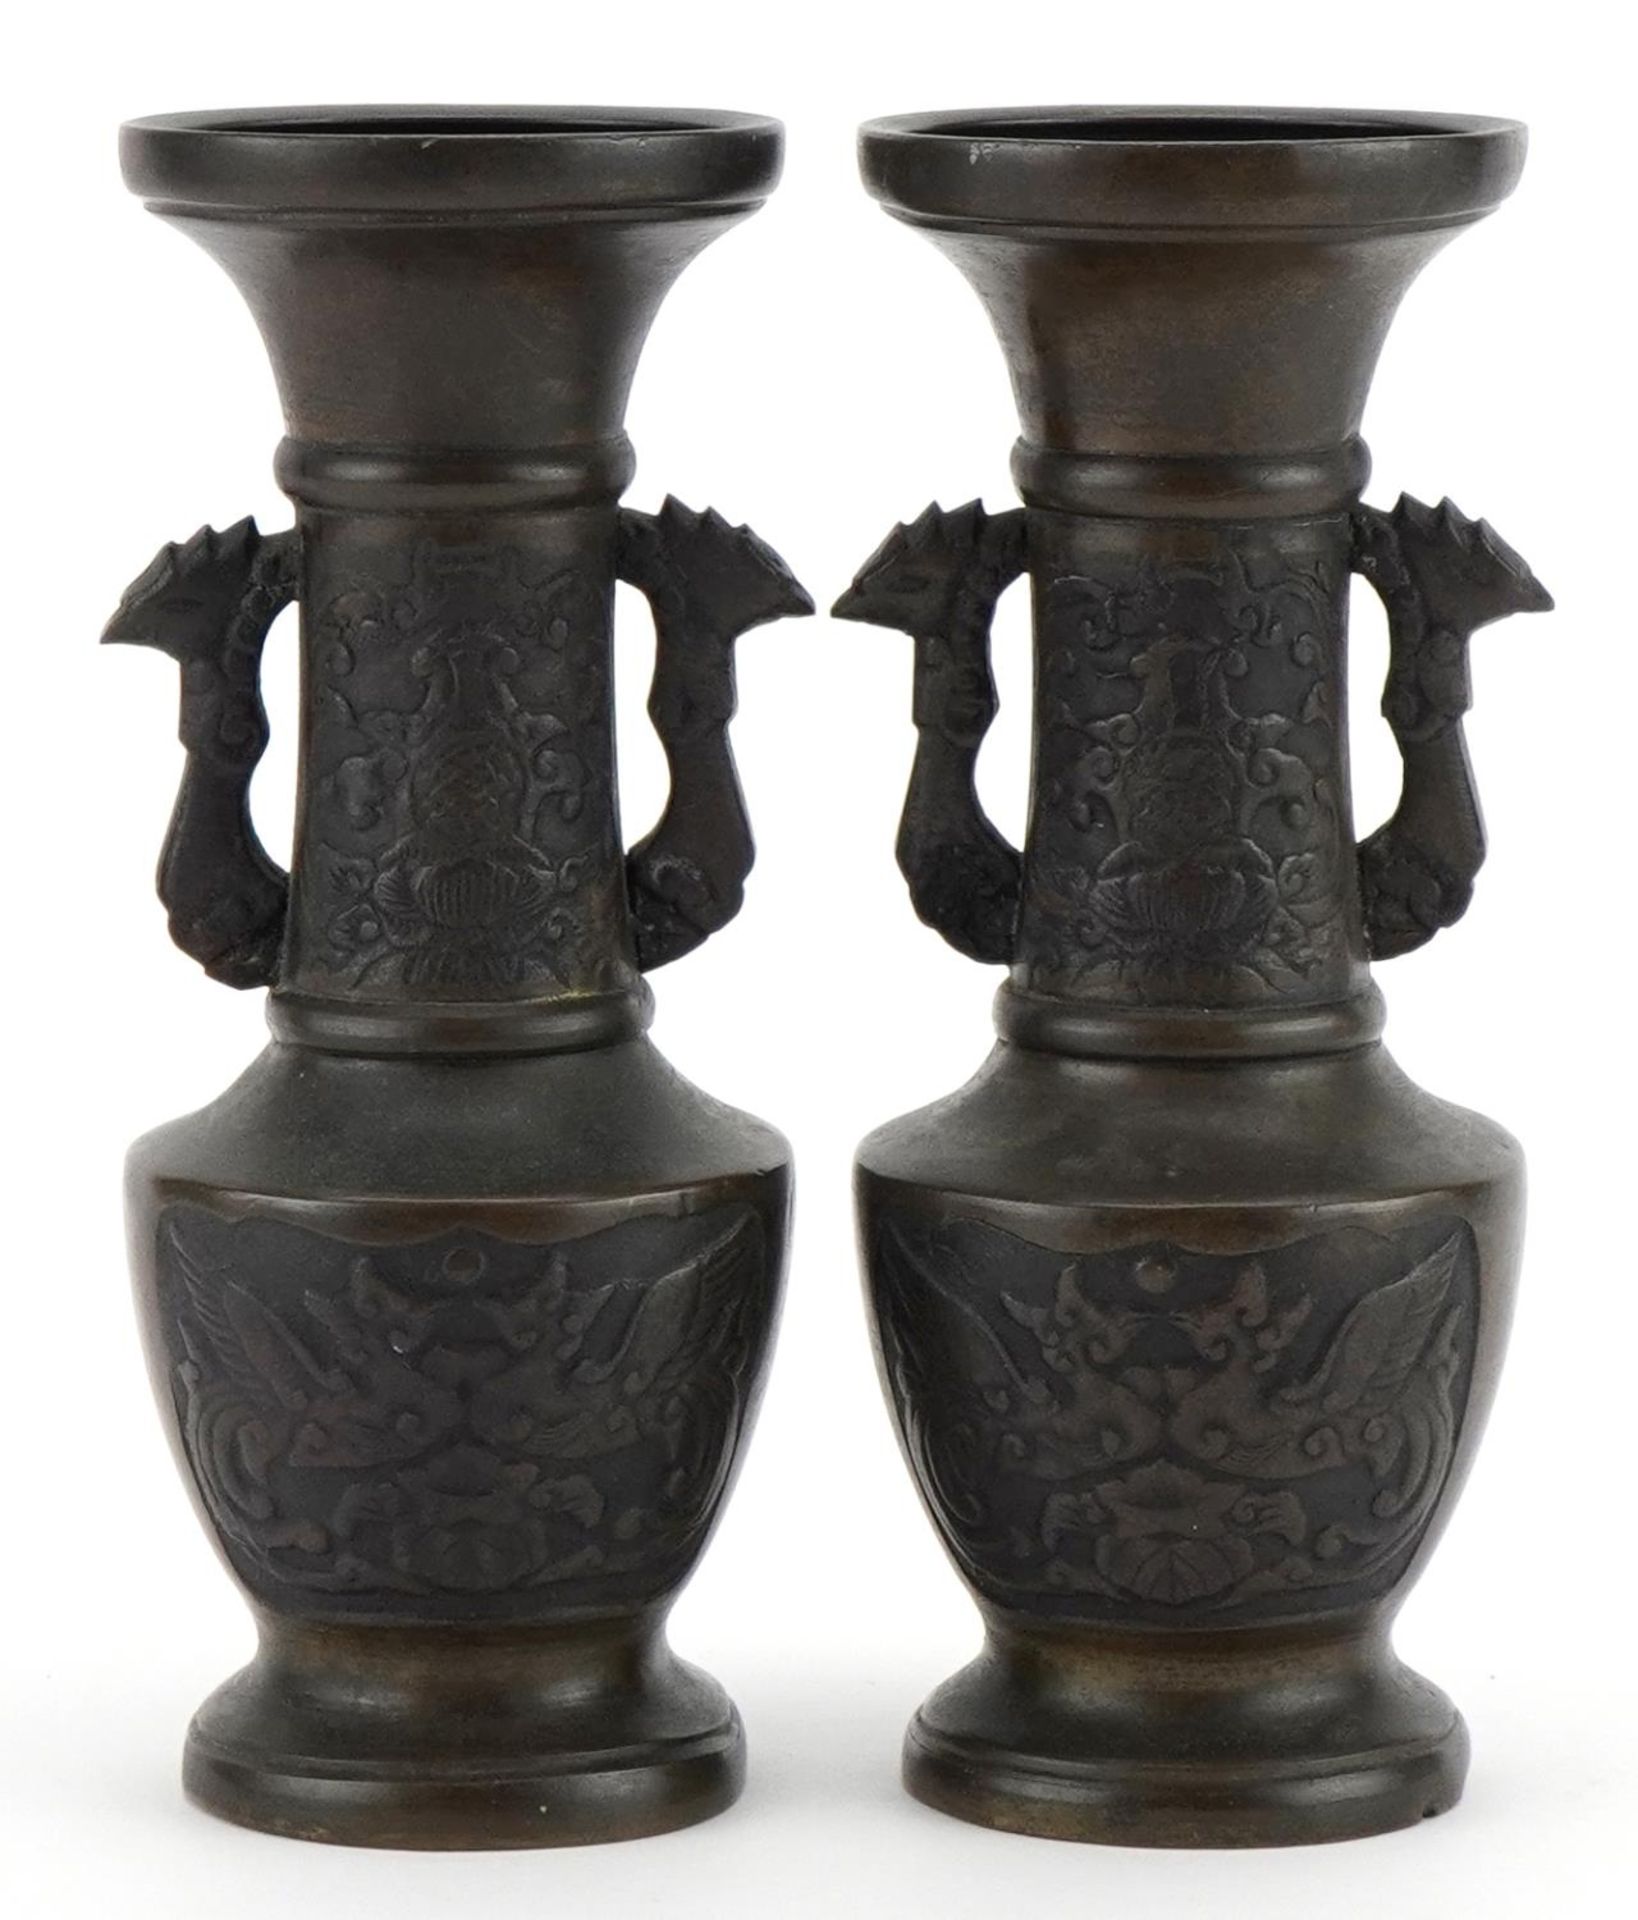 Pair of Japanese patinated bronze vases, each with phoenix handles, 14.5cm high - Image 2 of 3